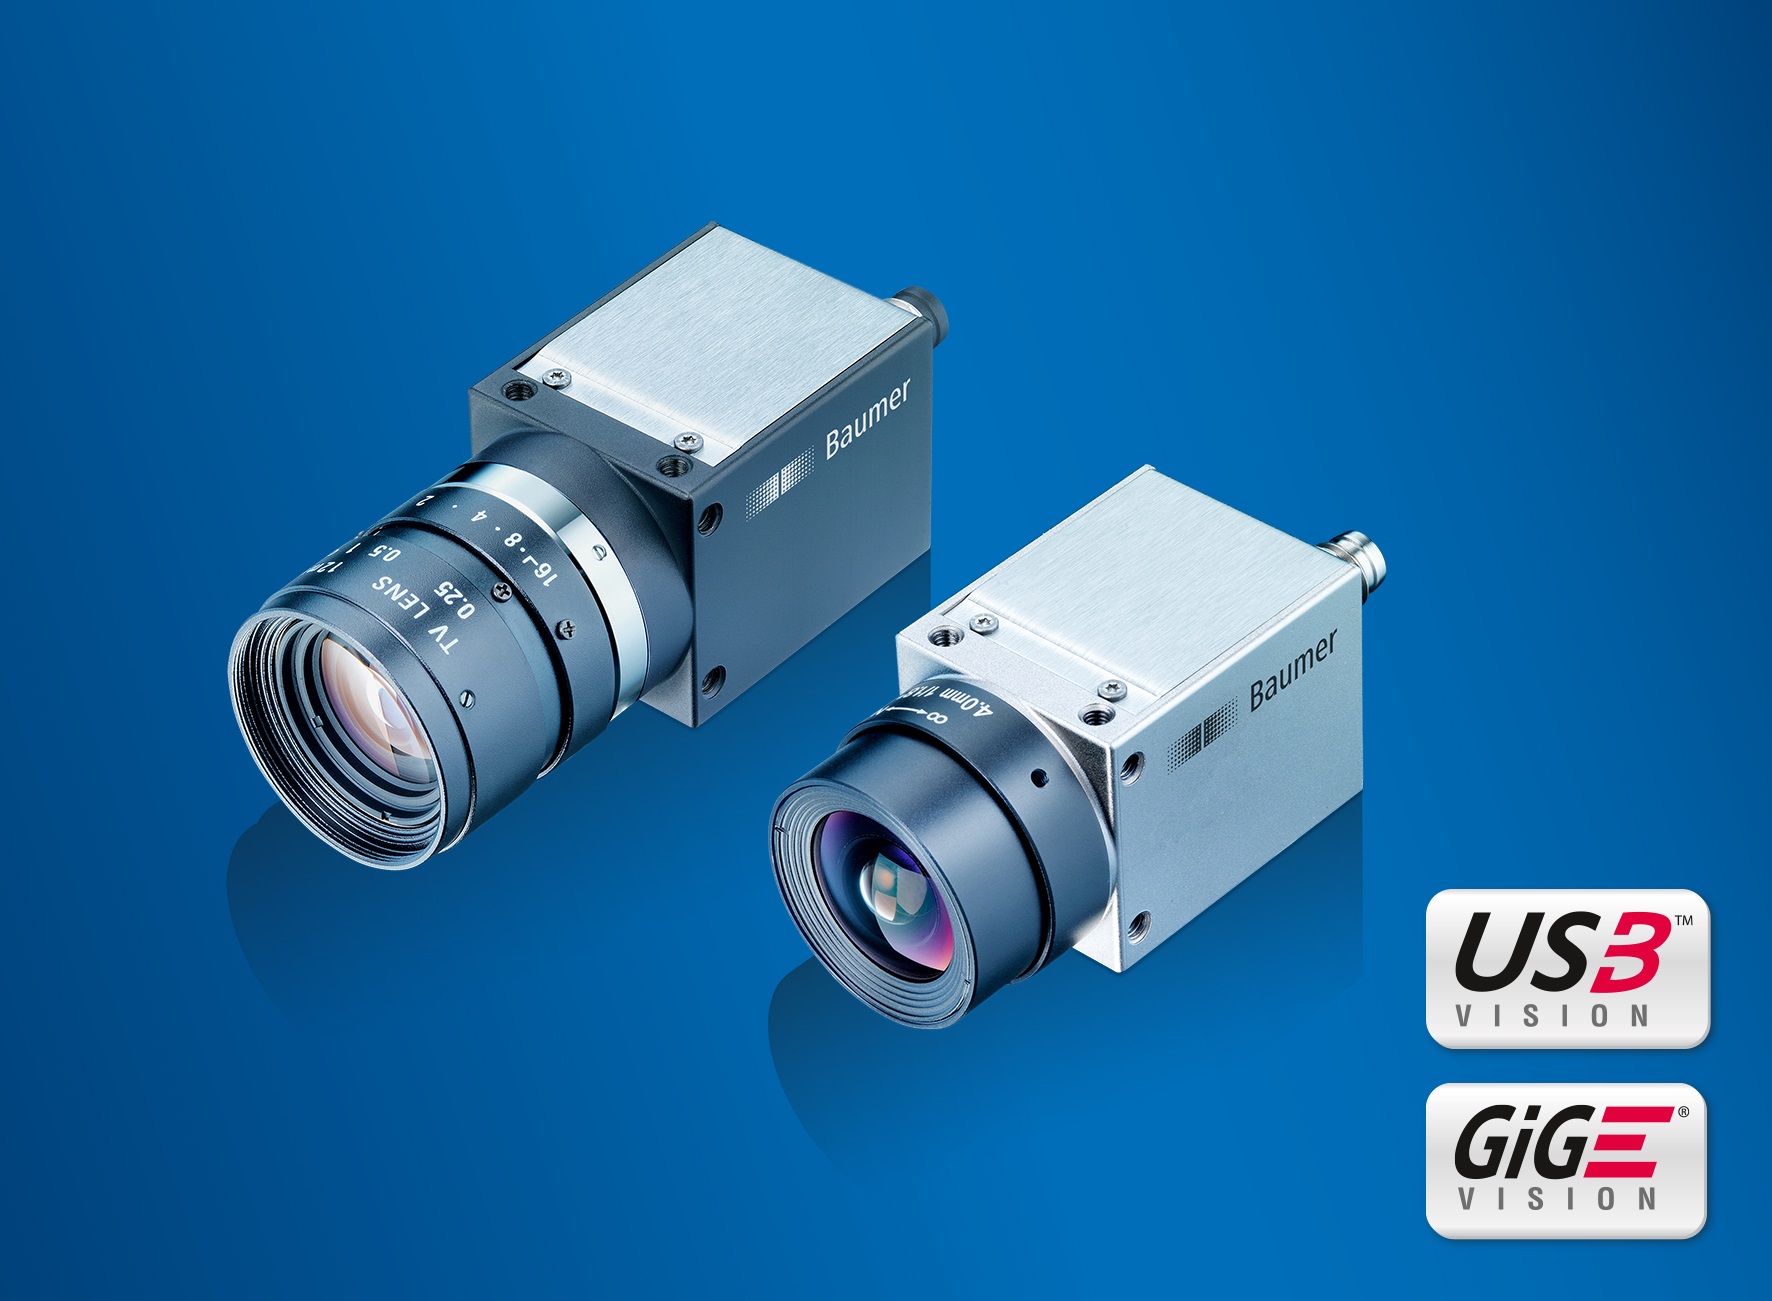 10 new models with rolling shutter sensors were added to the successful CX and EX Baumer camera series which now offers resolutions with 20 and 10 megapixel, respectively.